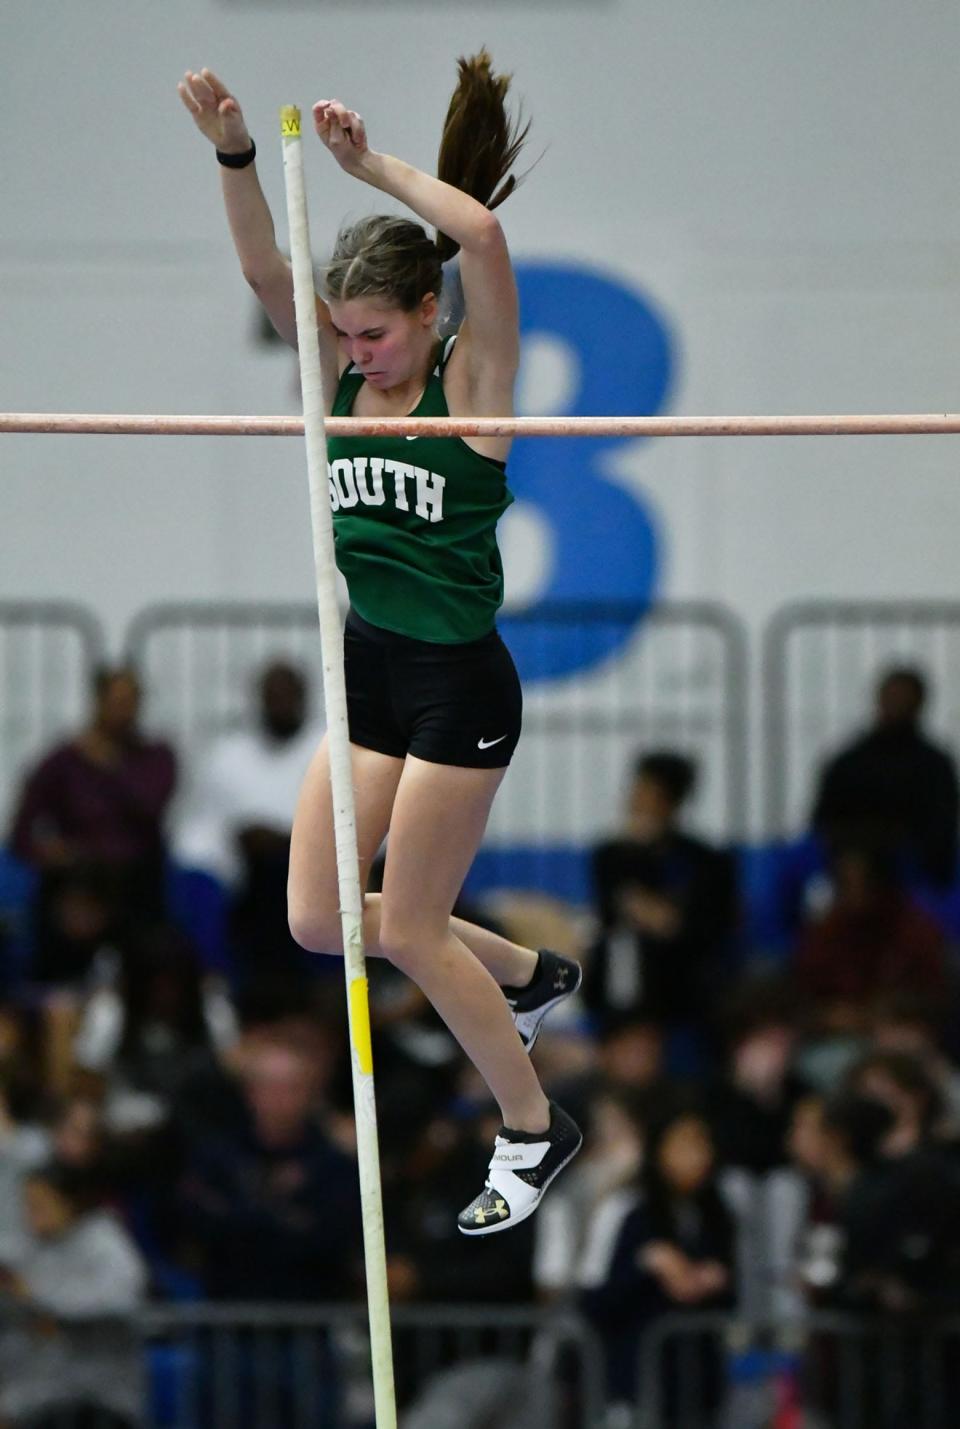 South Hagerstown's Riley Troxell clears the bar at 10 feet for fifth place in the Class 3A girls pole vault during the Maryland Indoor Track and Field Championships.